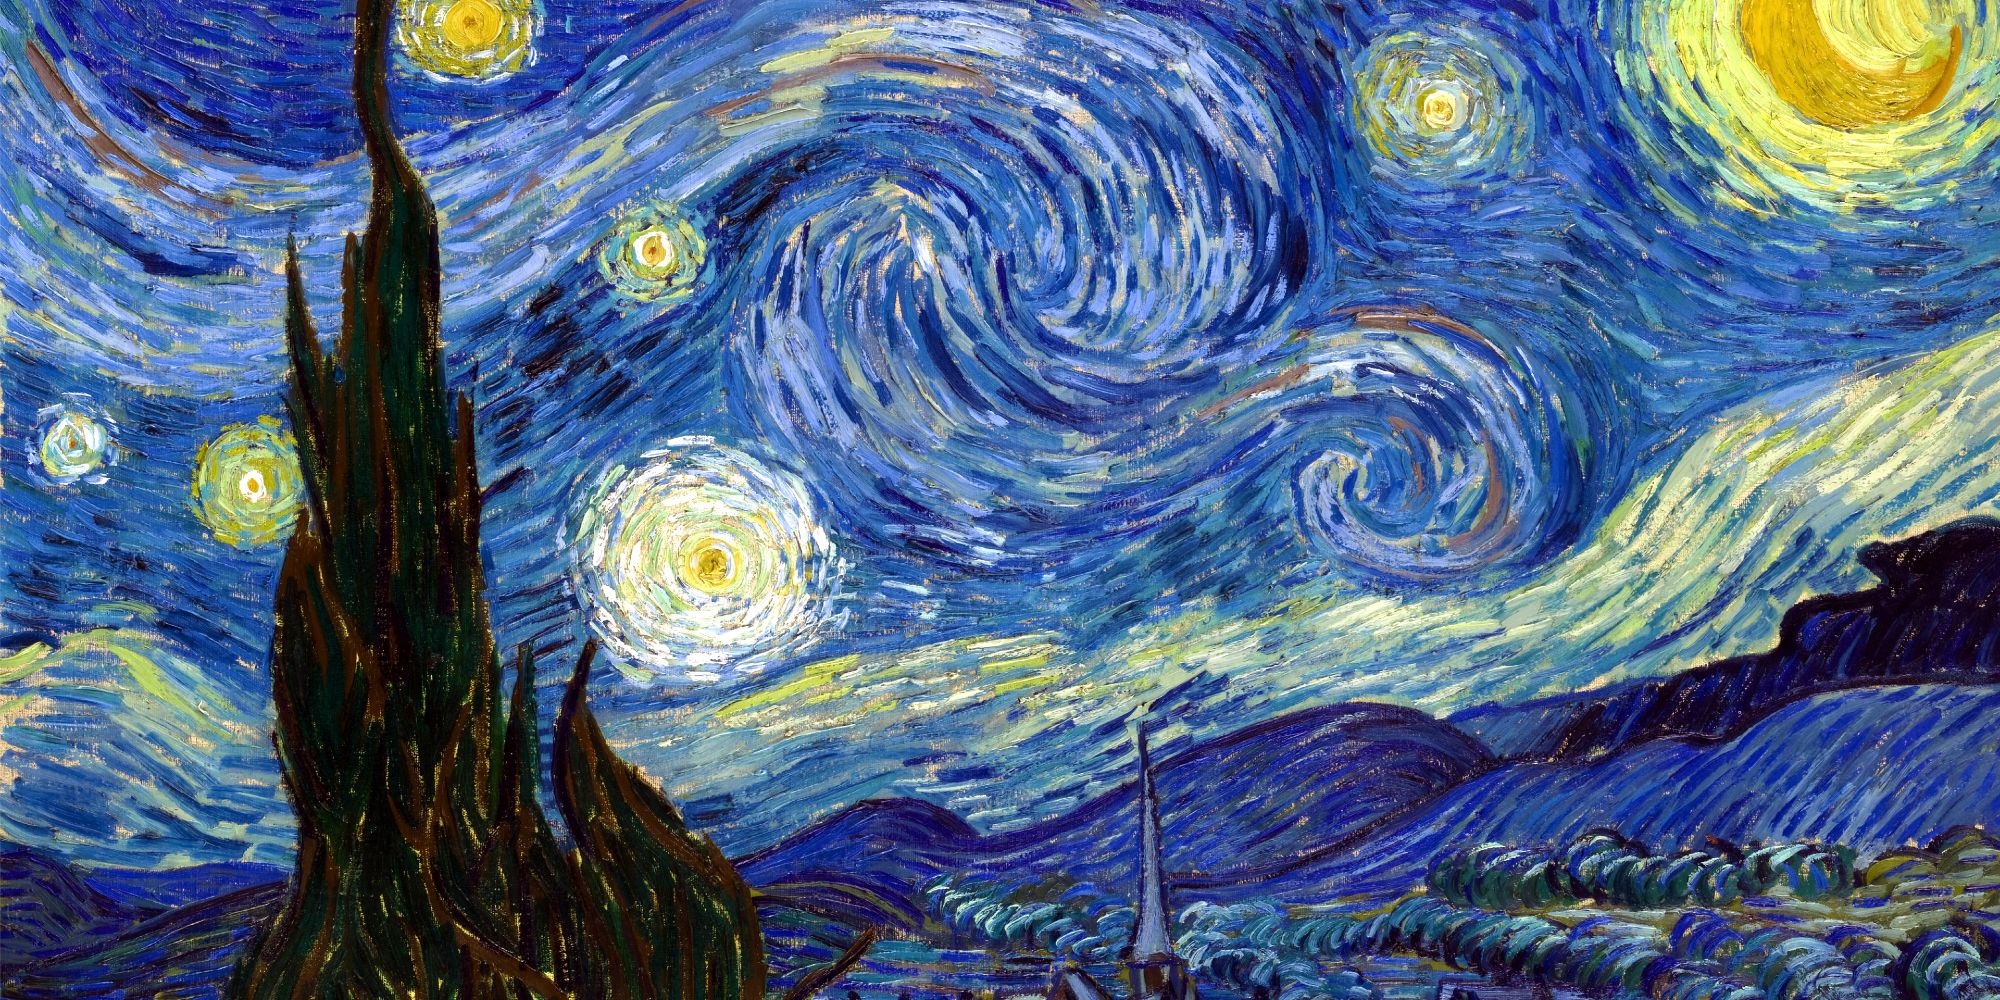 Vincent Van Gogh's painting The Starry Night